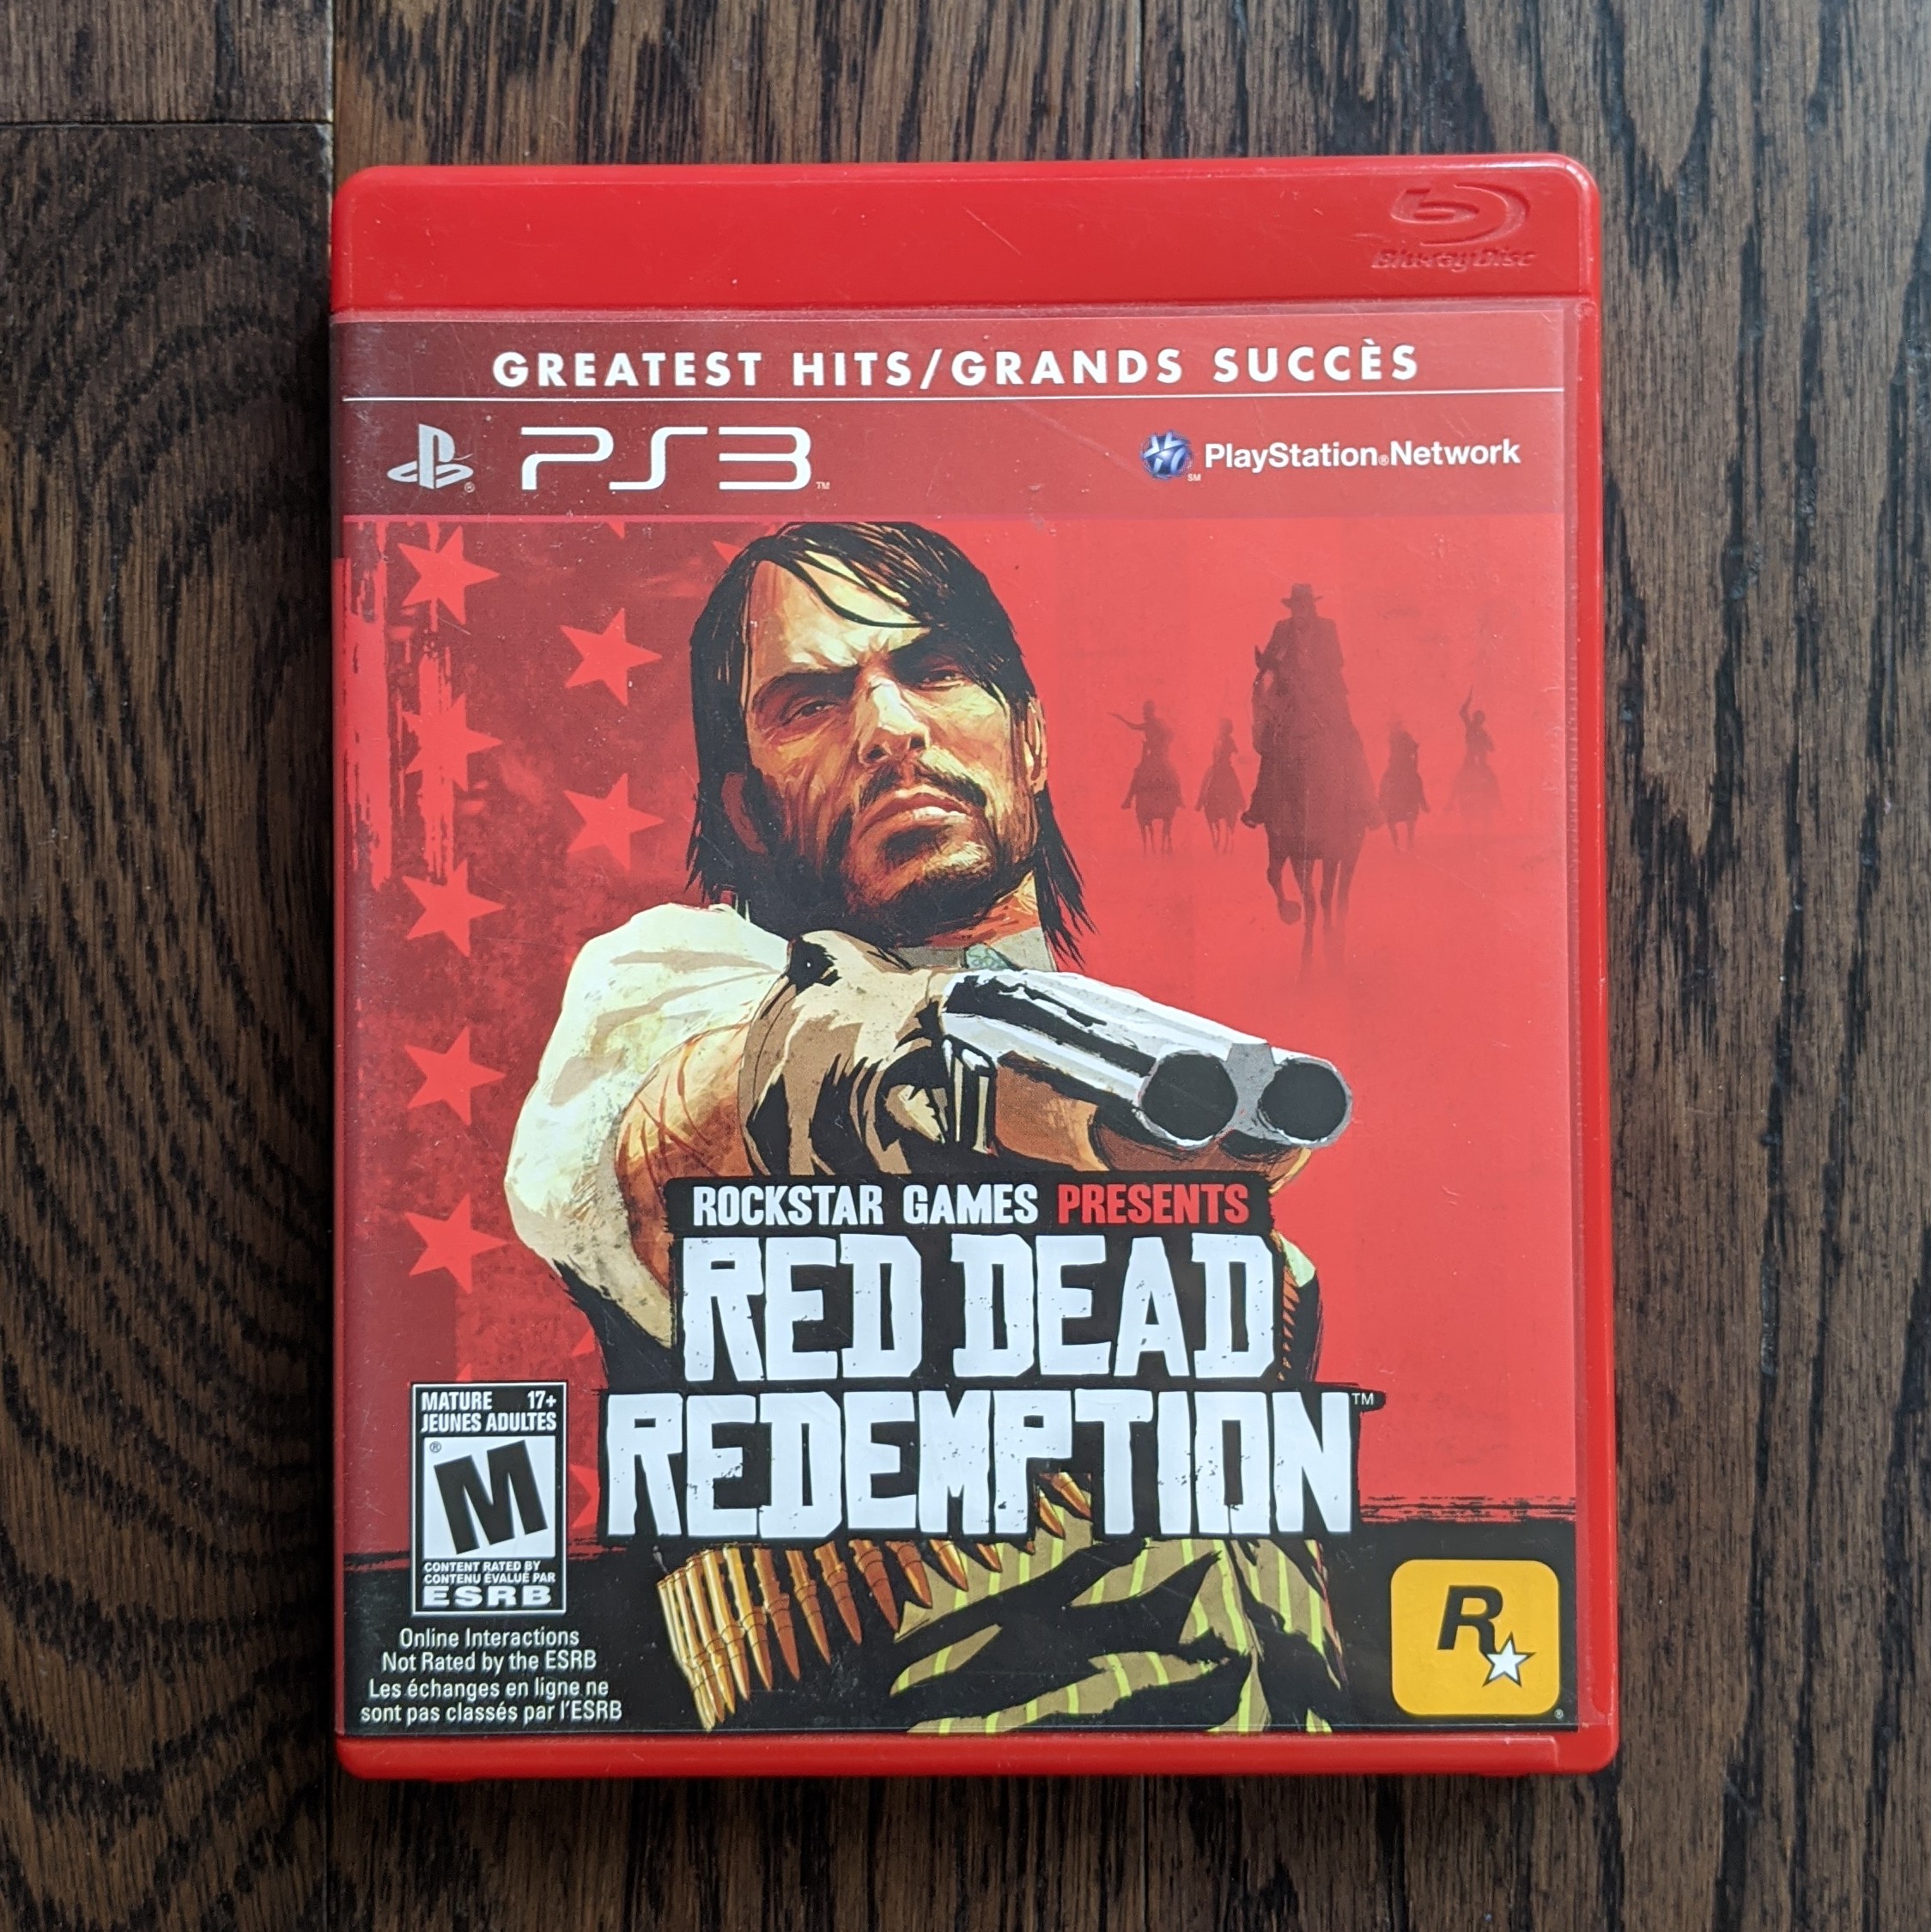 Red Dead Redemption - PS3, Greatest Hits Edition